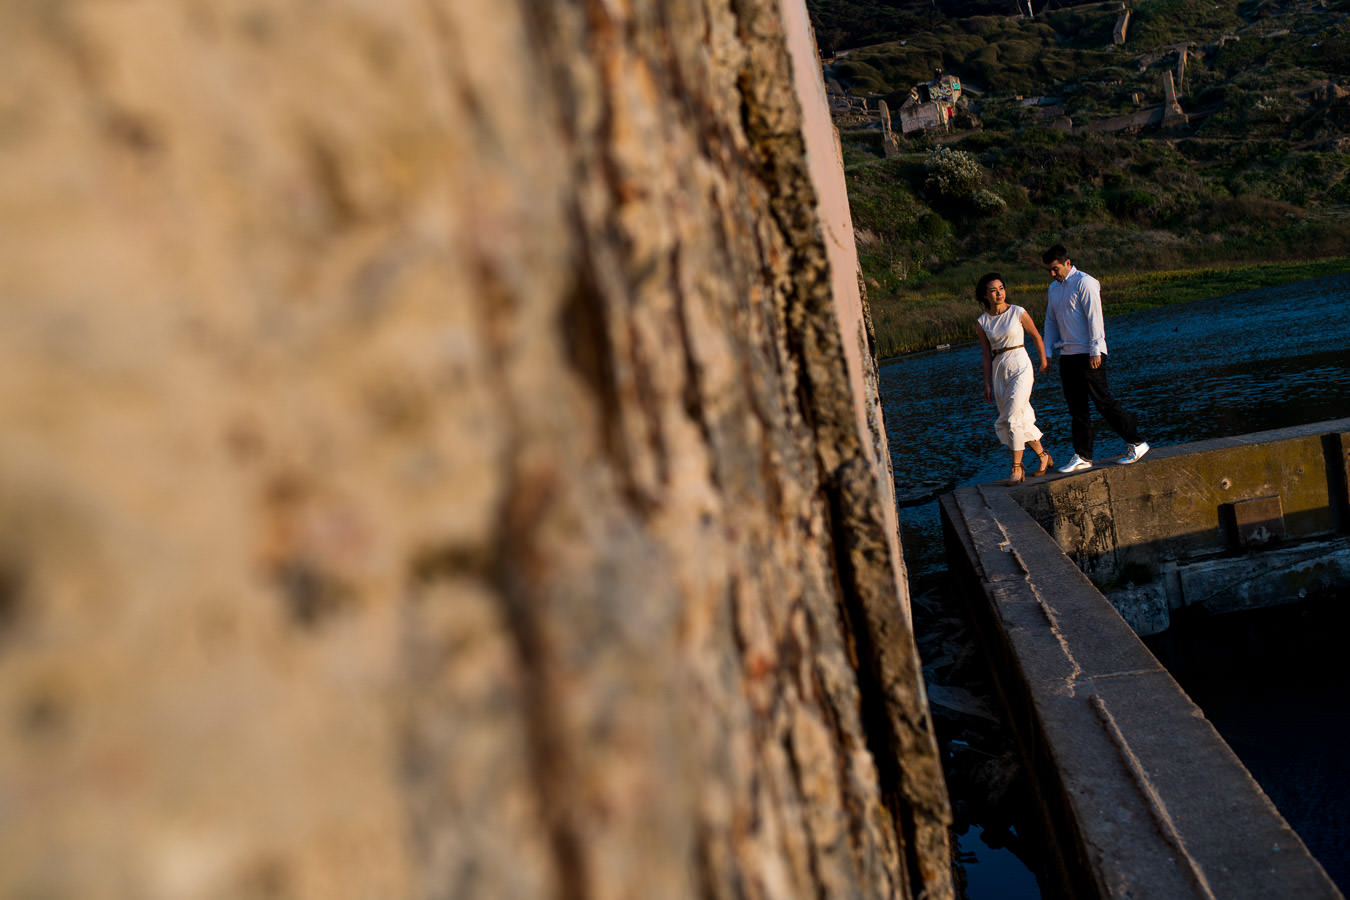 Sutro Baths Engagement Session | Photo by Duy Ho | duyhophotography.com